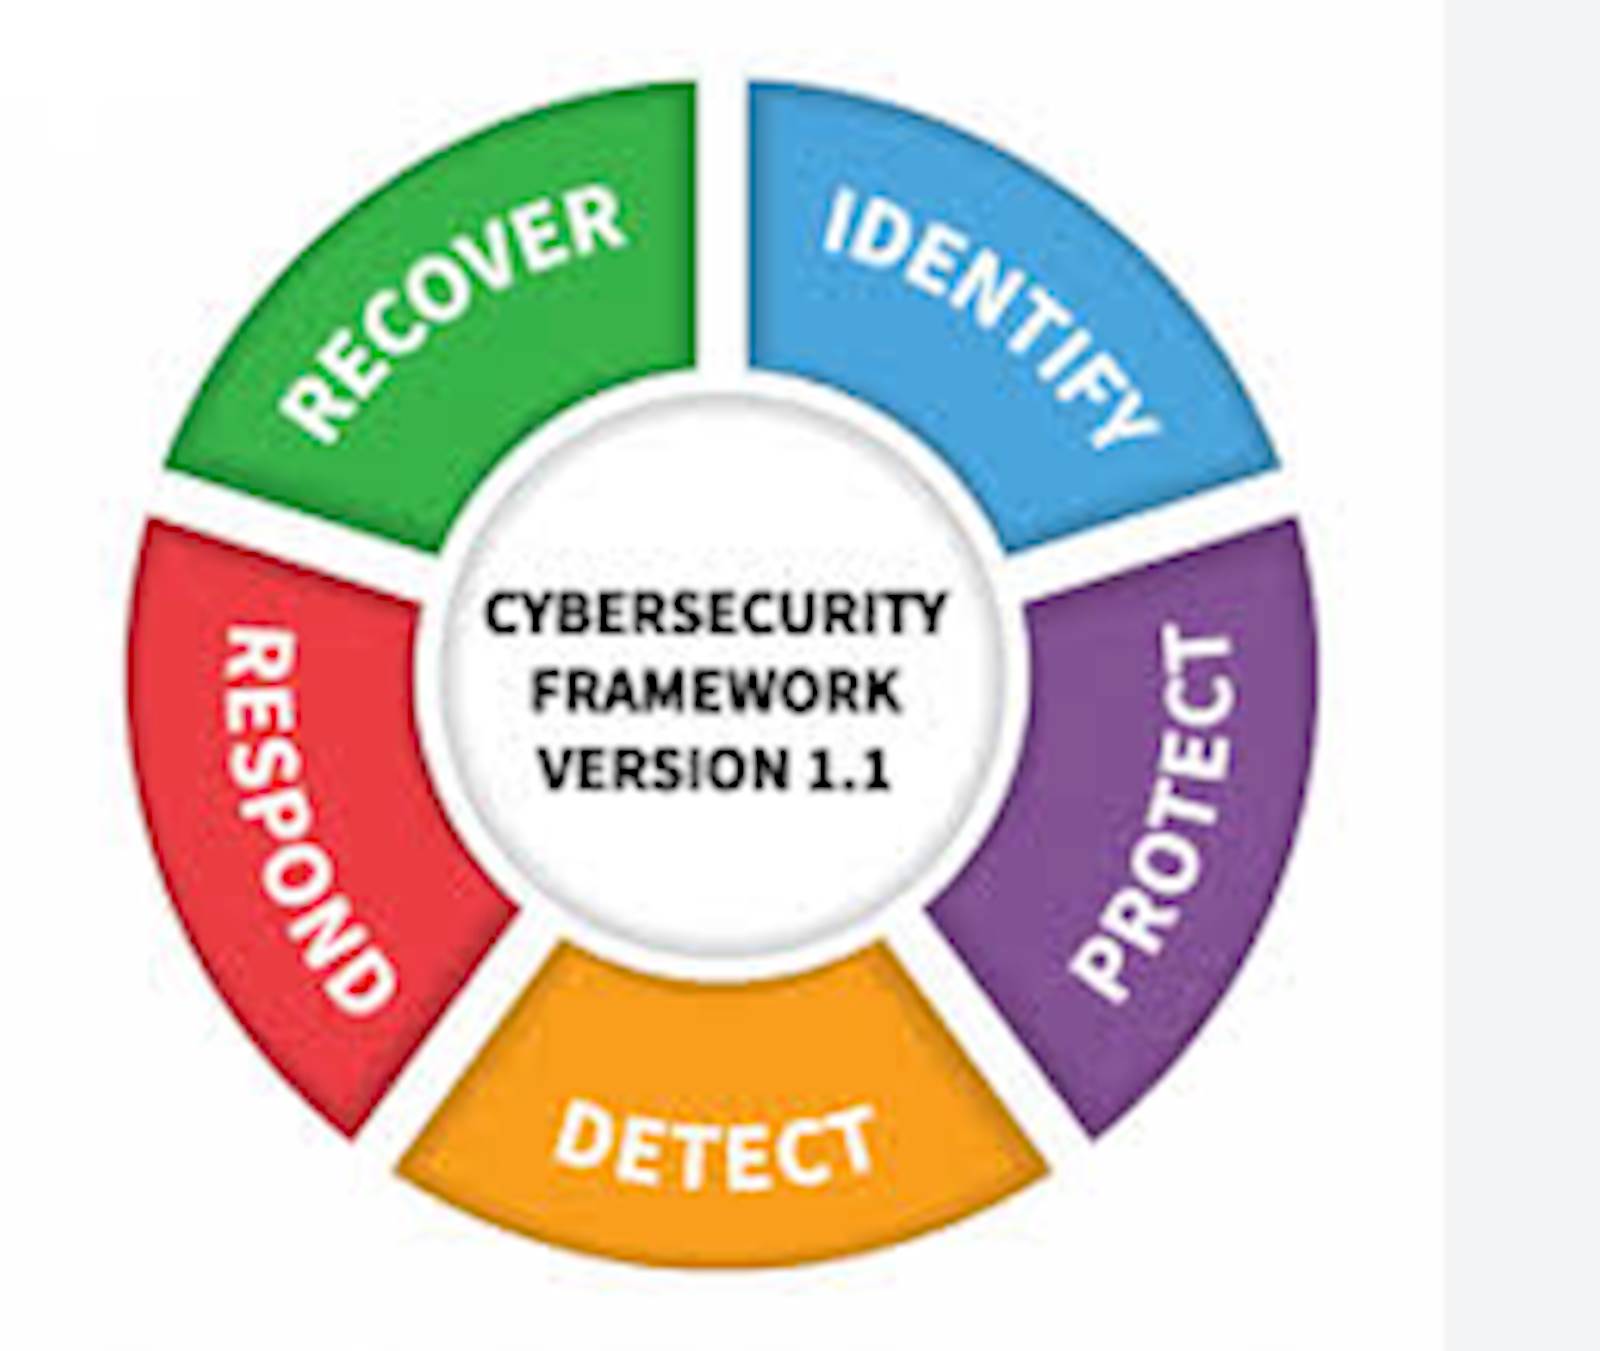 CyberSecurity Framework Version 1.1: Recover, Identify, Protect, Detect, Respond